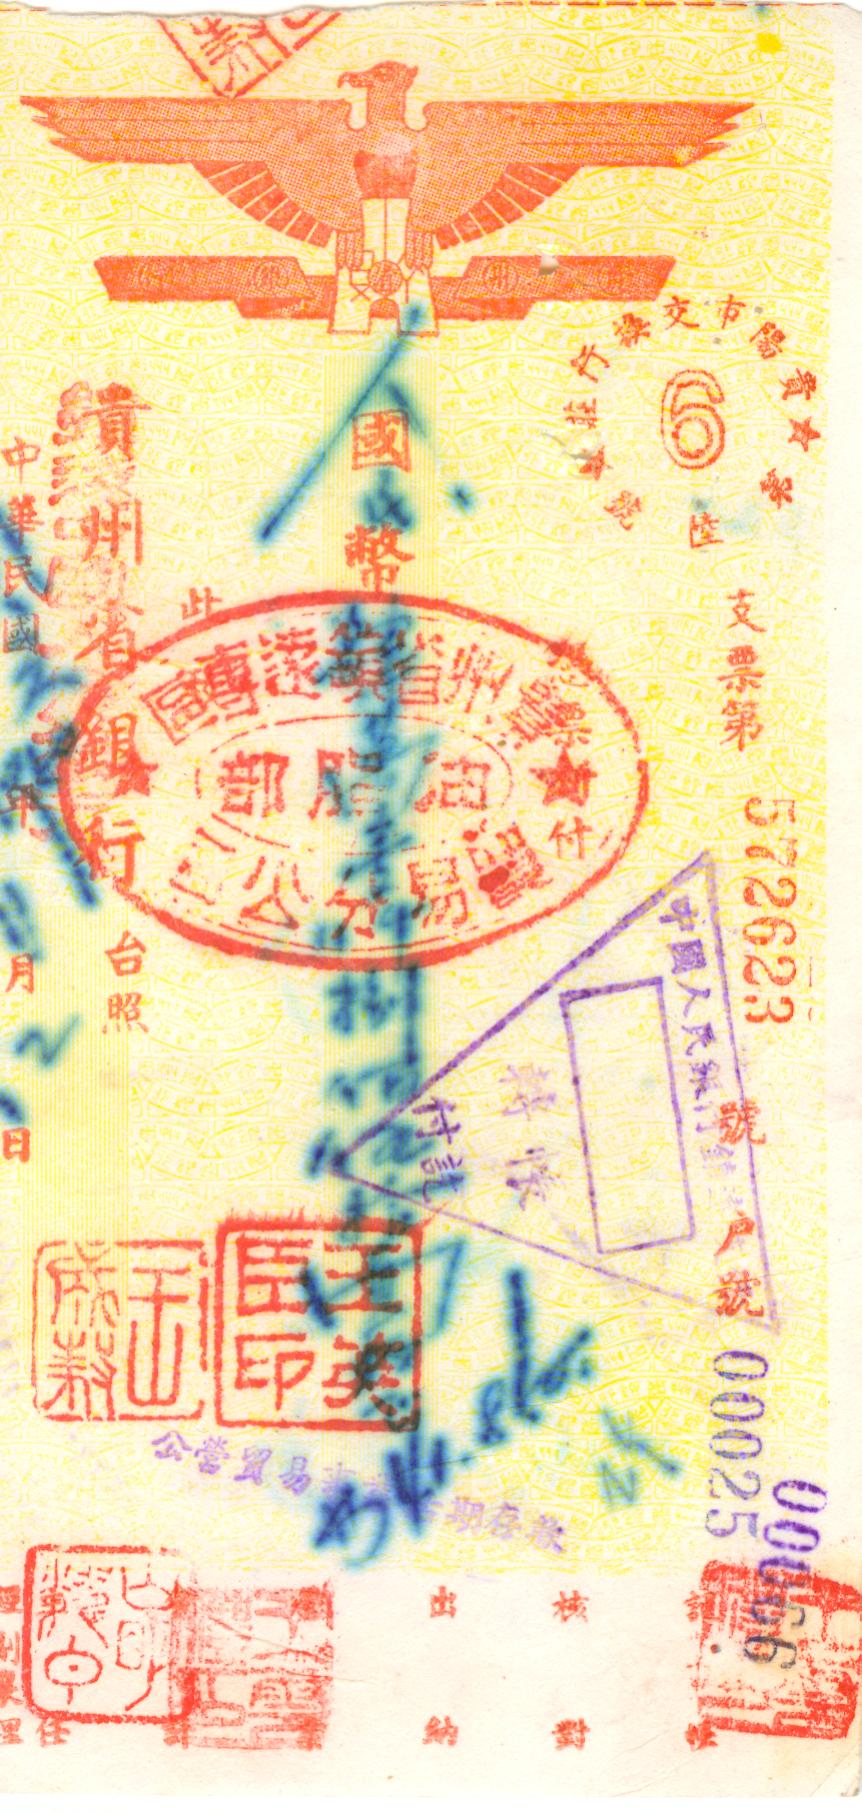 D1795, Check of Guizhou Provincial Bank, China, 1952 Cheque